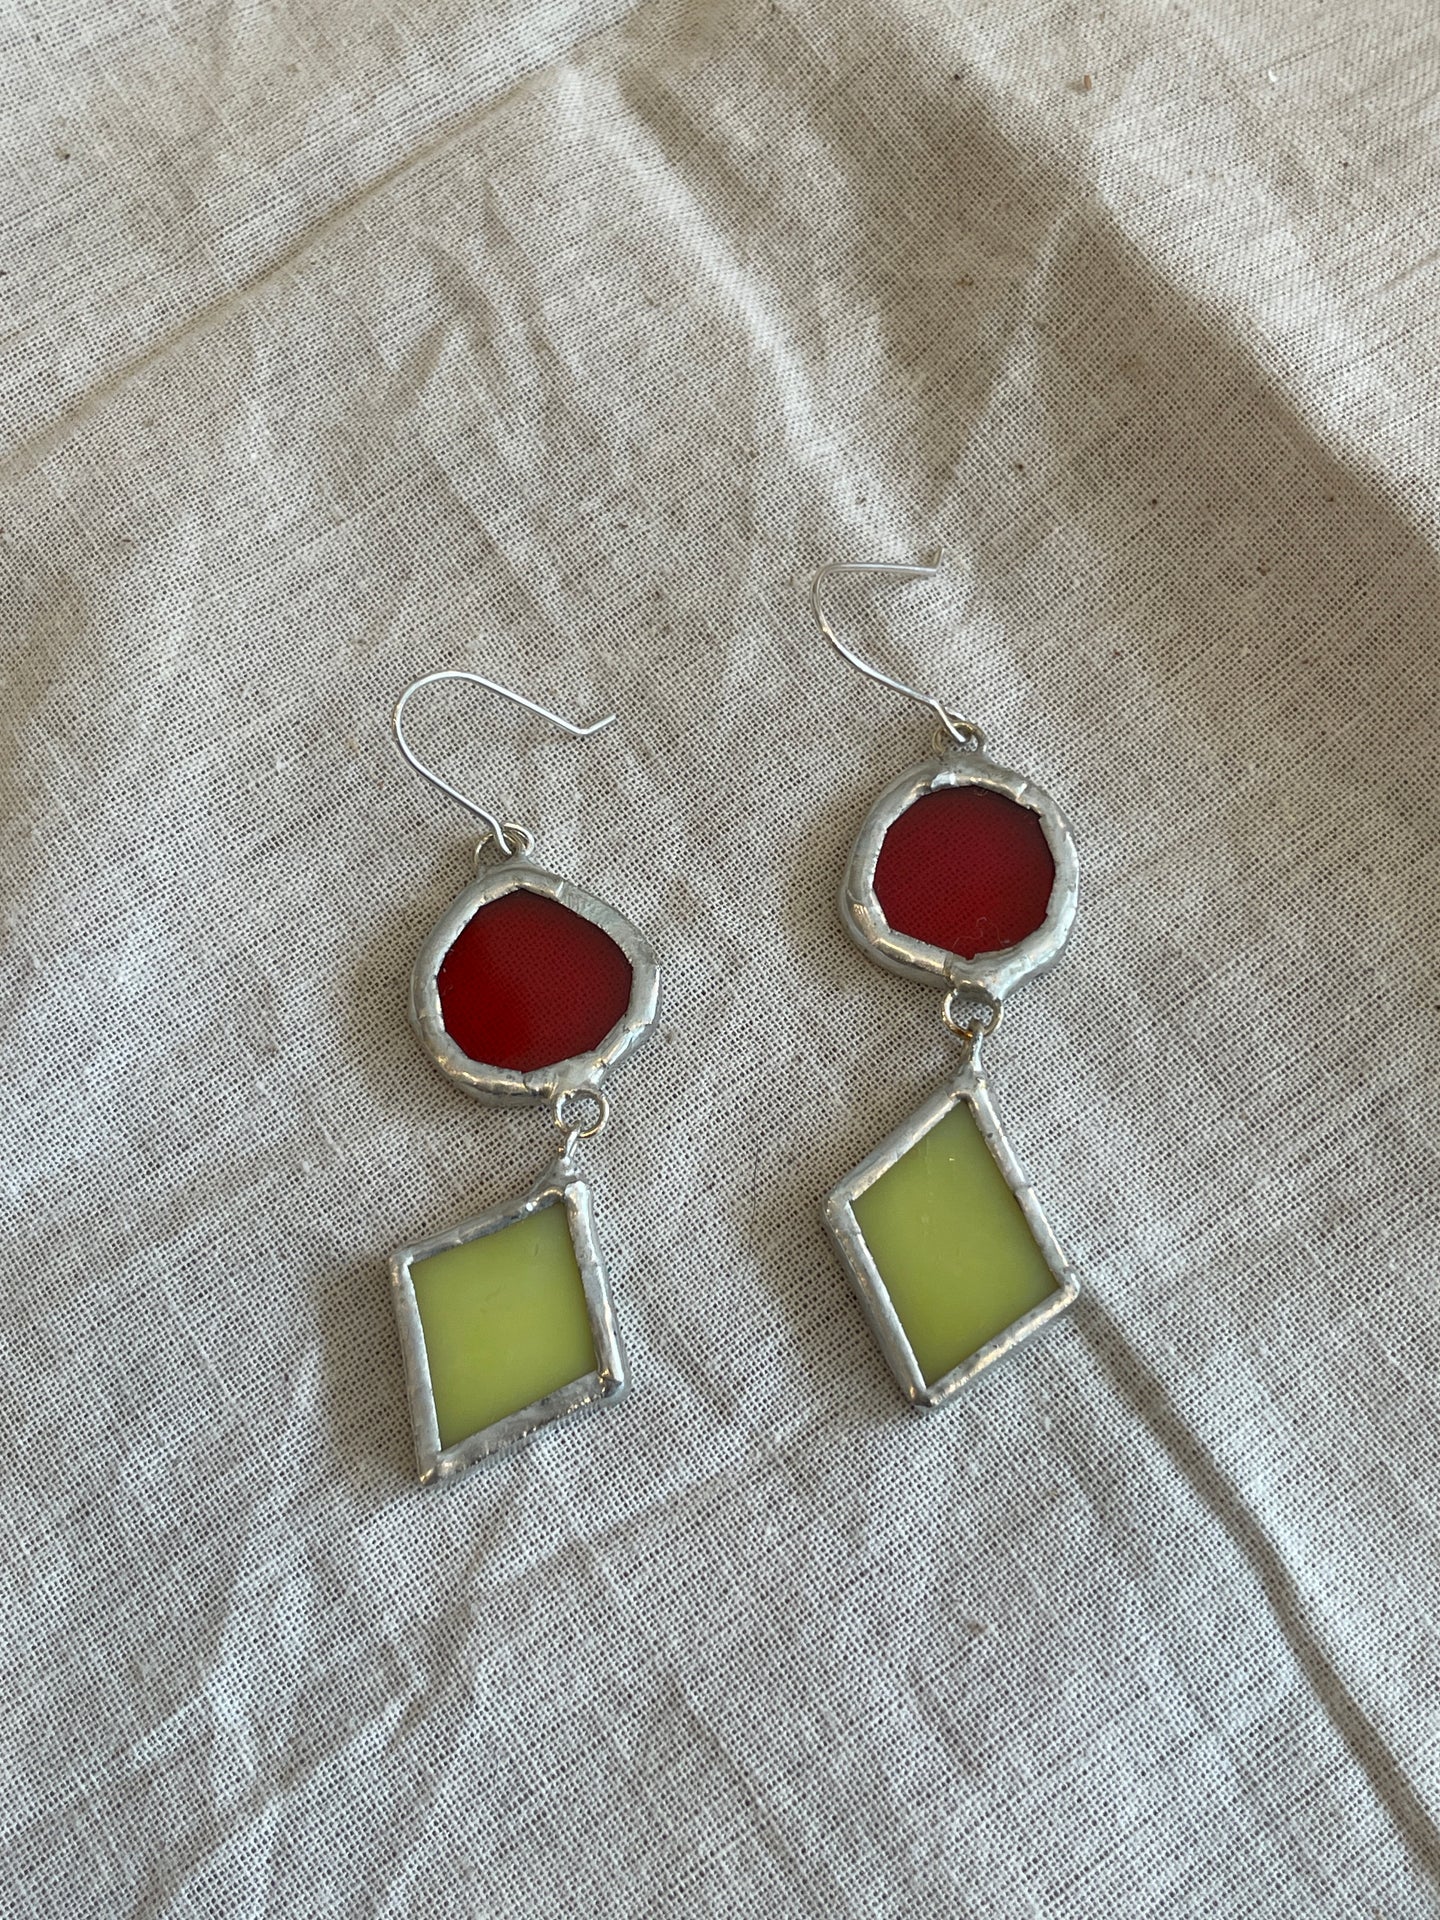 Stained Glass Earrings - Small